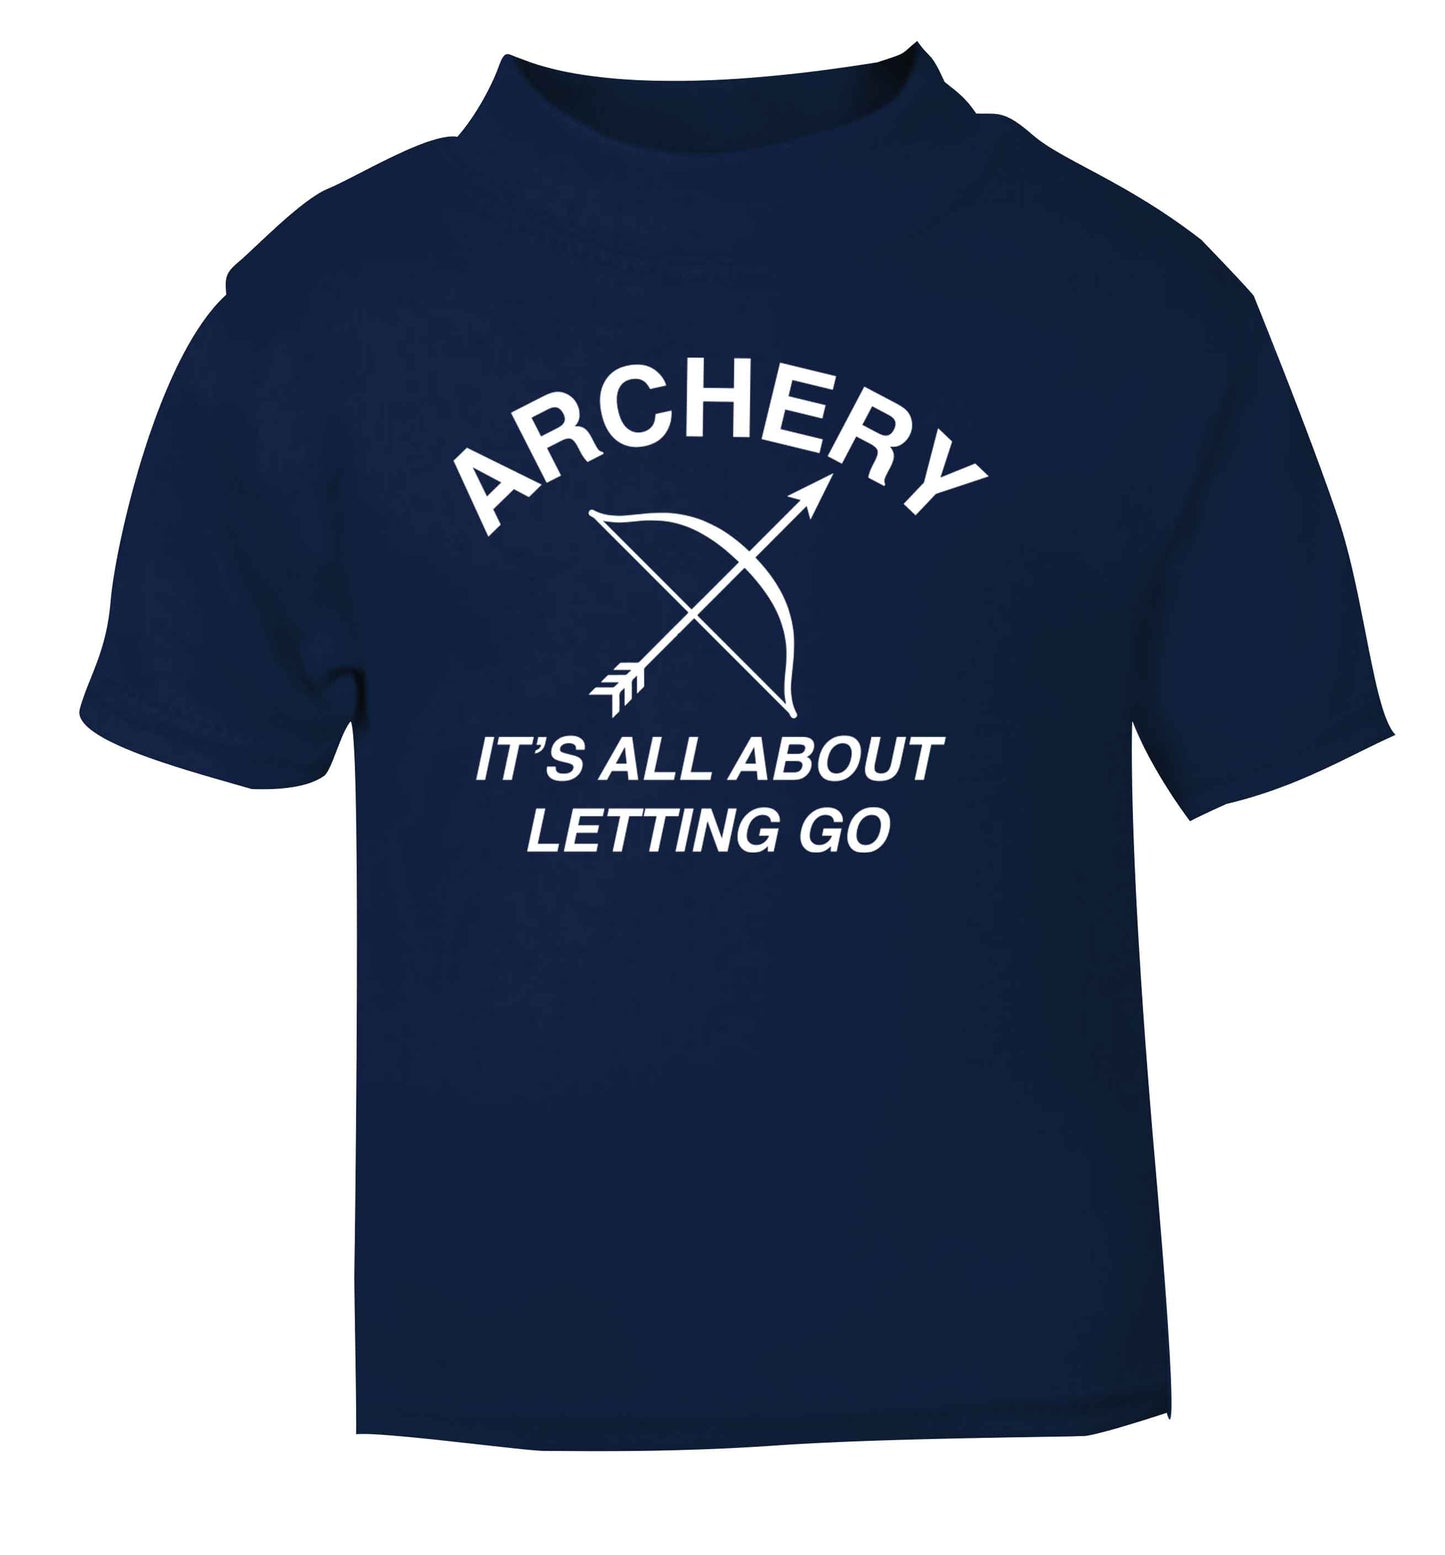 Archery it's all about letting go navy Baby Toddler Tshirt 2 Years